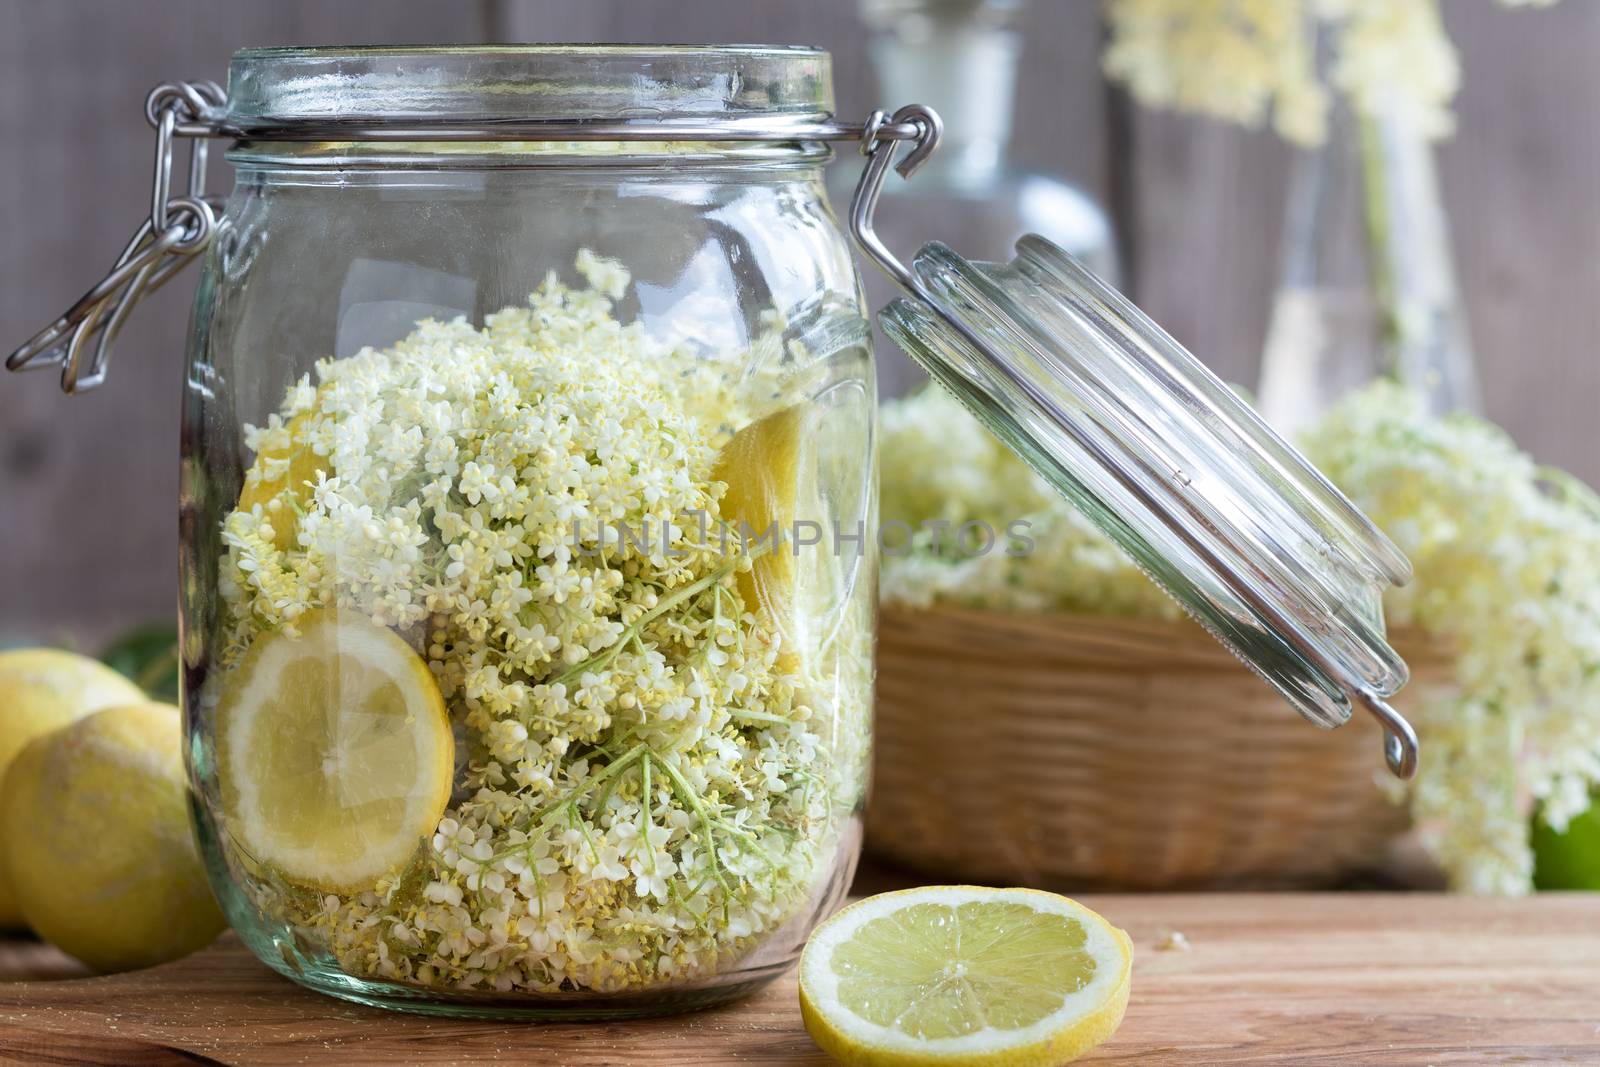 Fresh elder flowers and lemon in a glass jar, ready to prepare a natural elder flower syrup